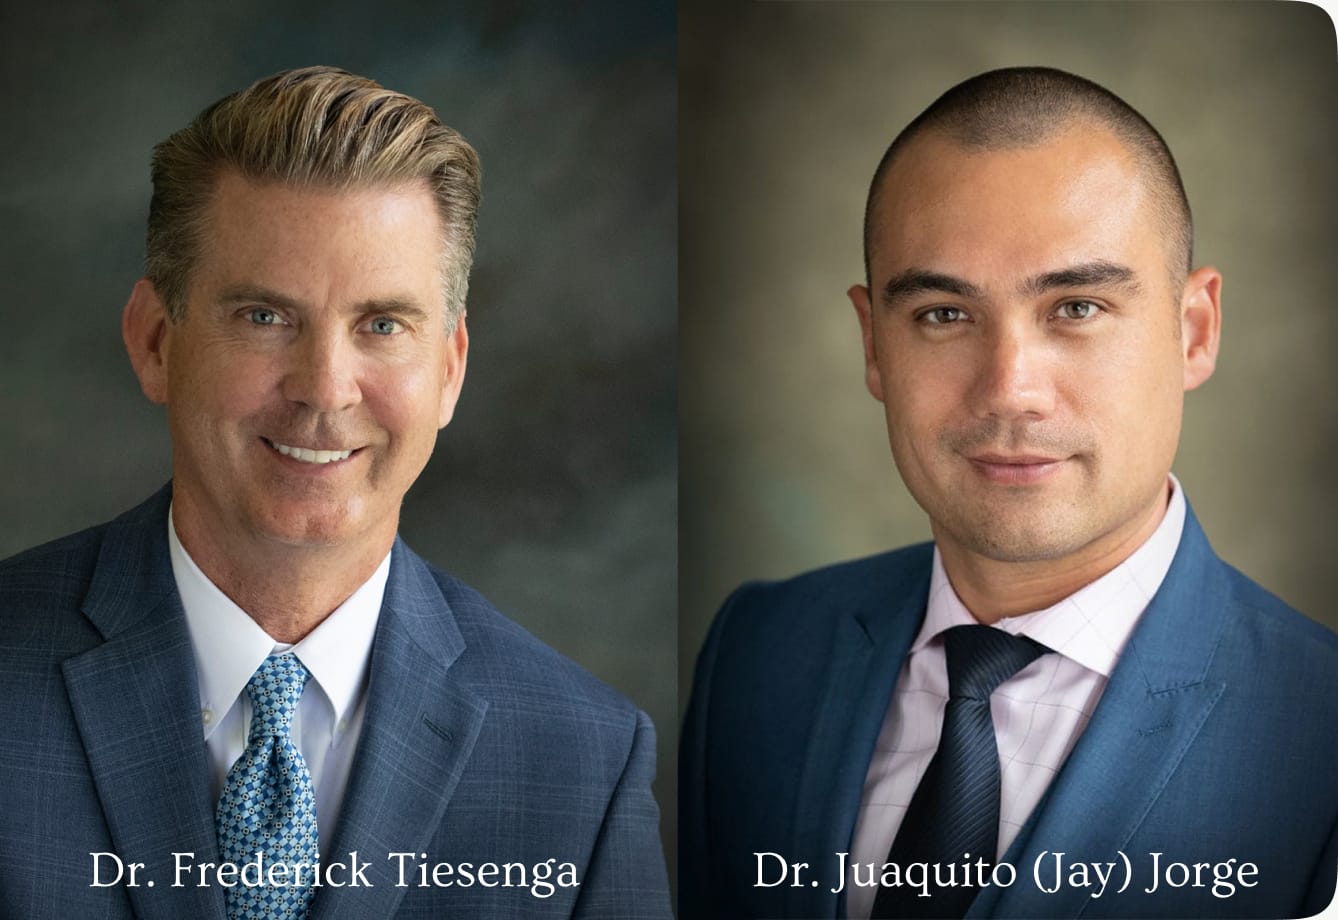 A portrait of Dr. Tiesenga and Dr. Jorge